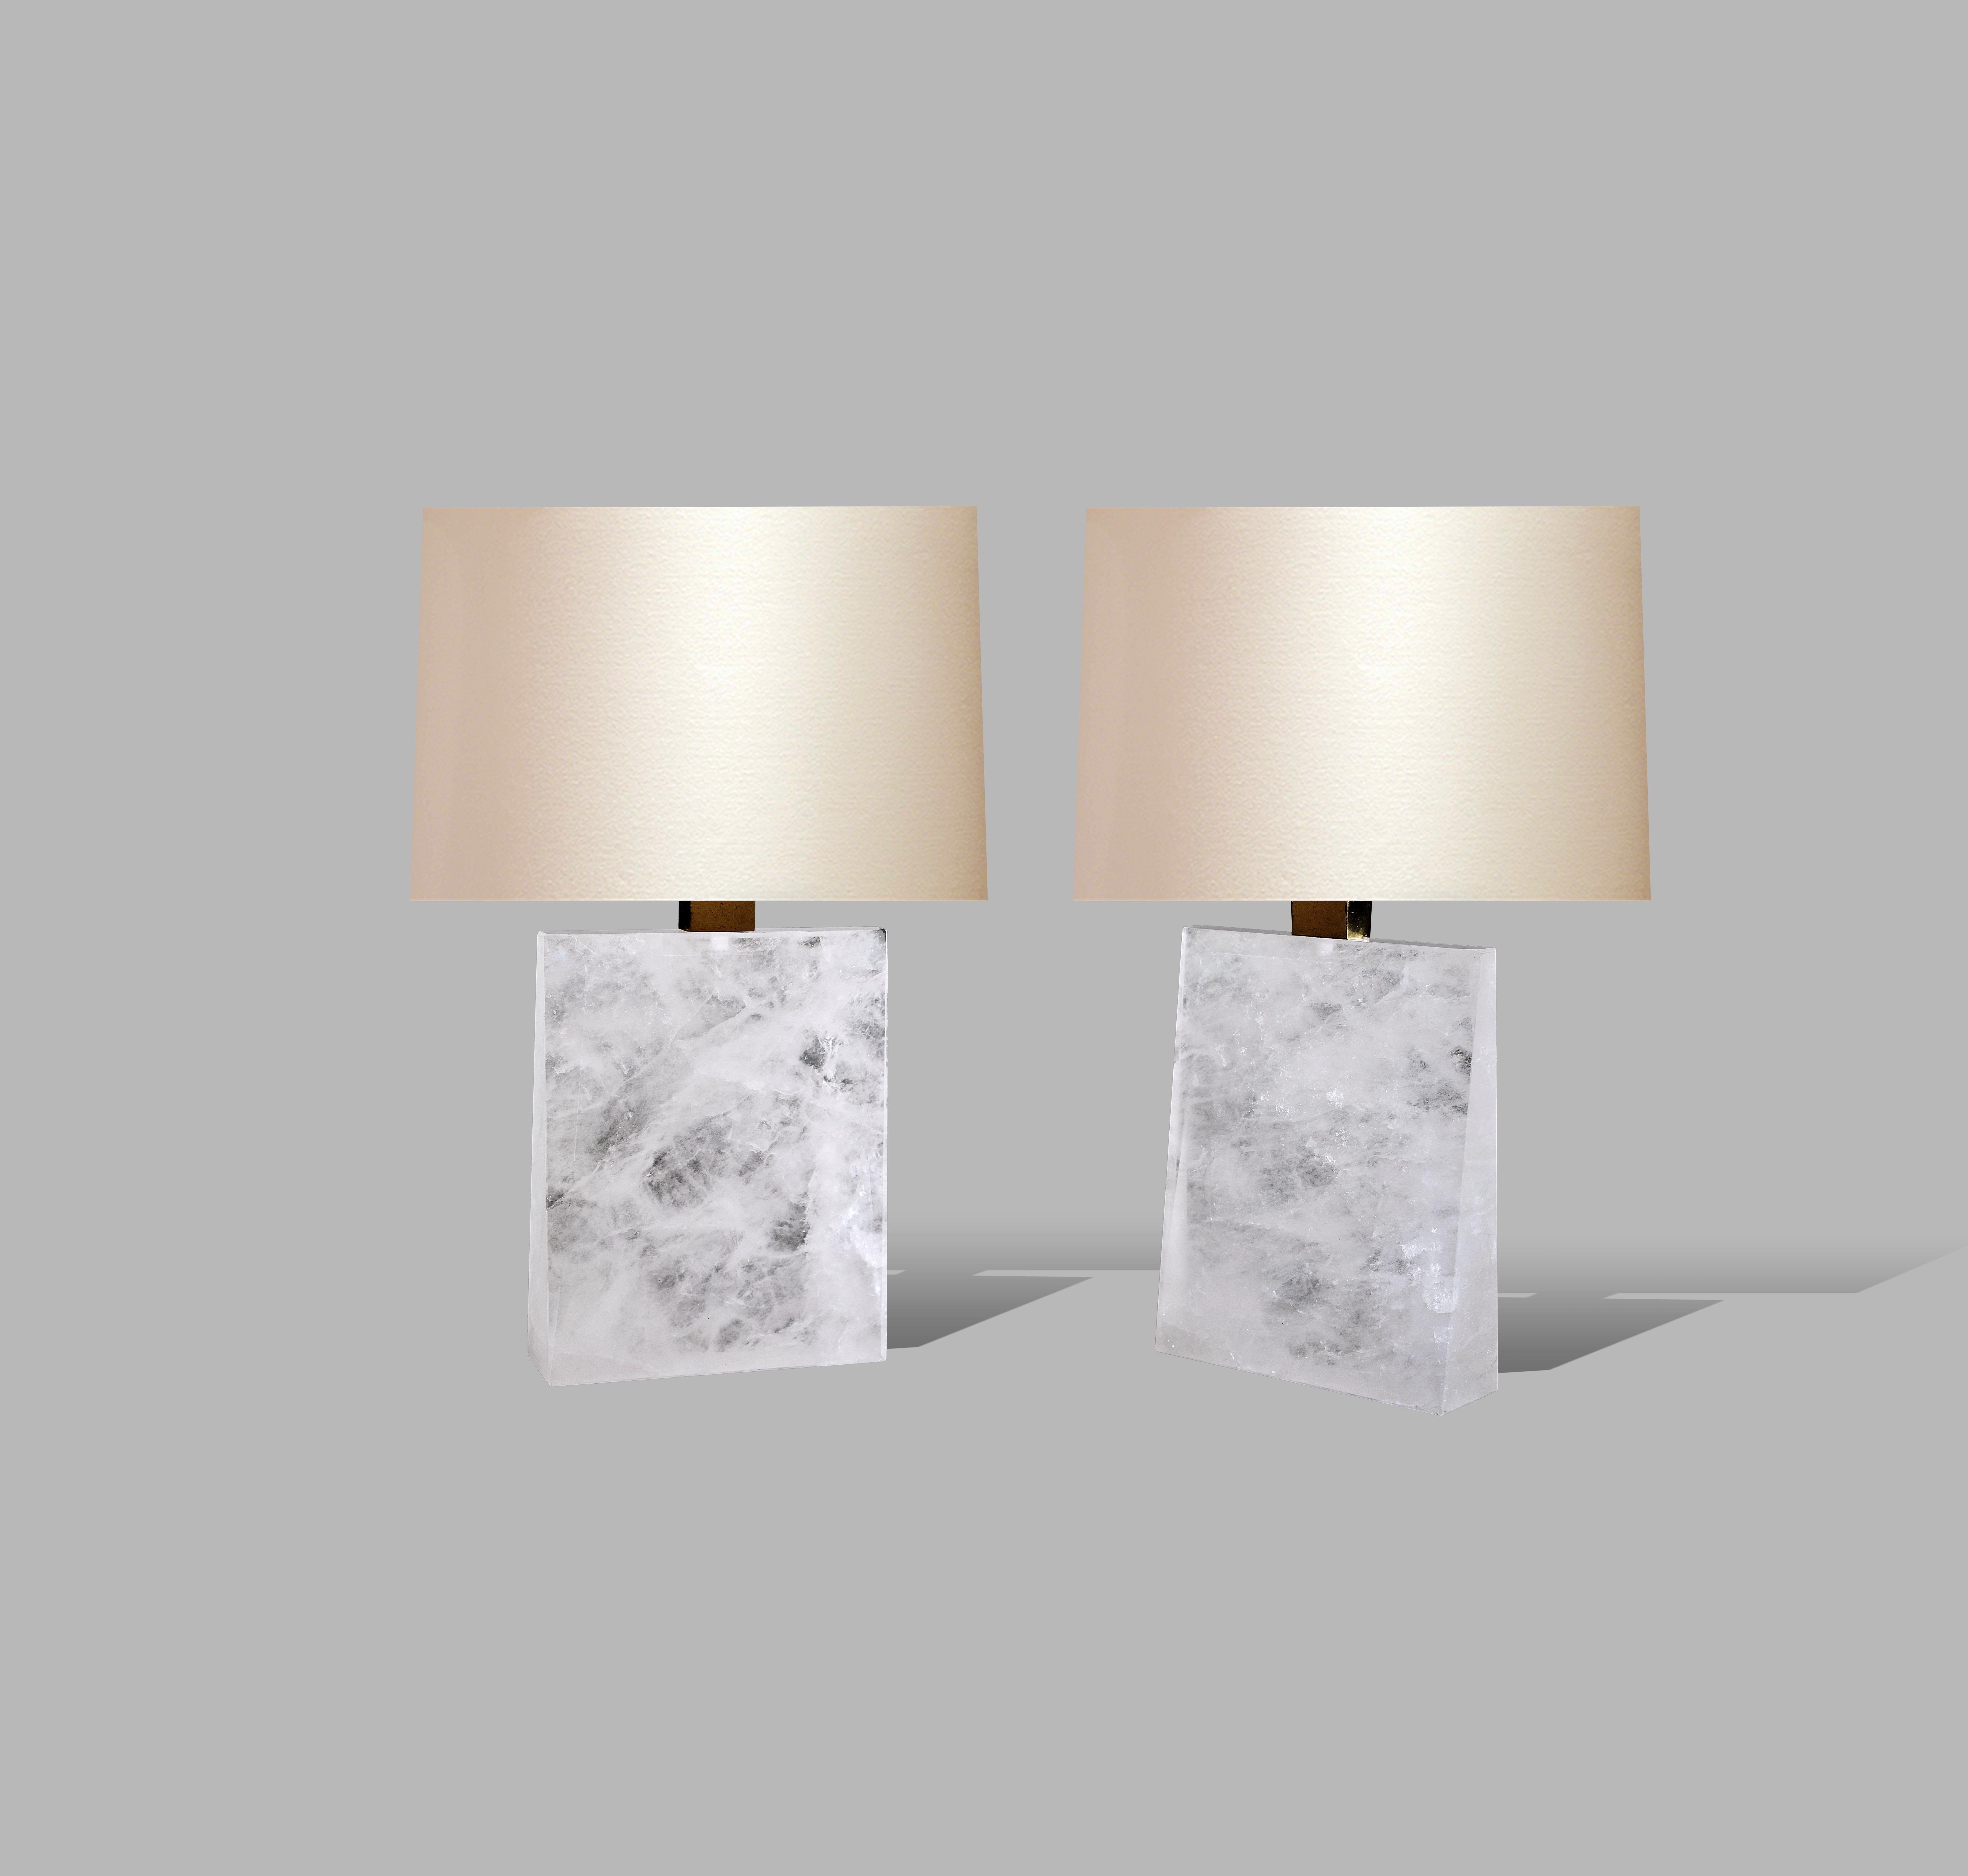 Finely carved symmetrical multifaceted rock crystal lamps with antique brass light setting. Created by Phoenix Gallery. 
To the top of rock crystal: 12